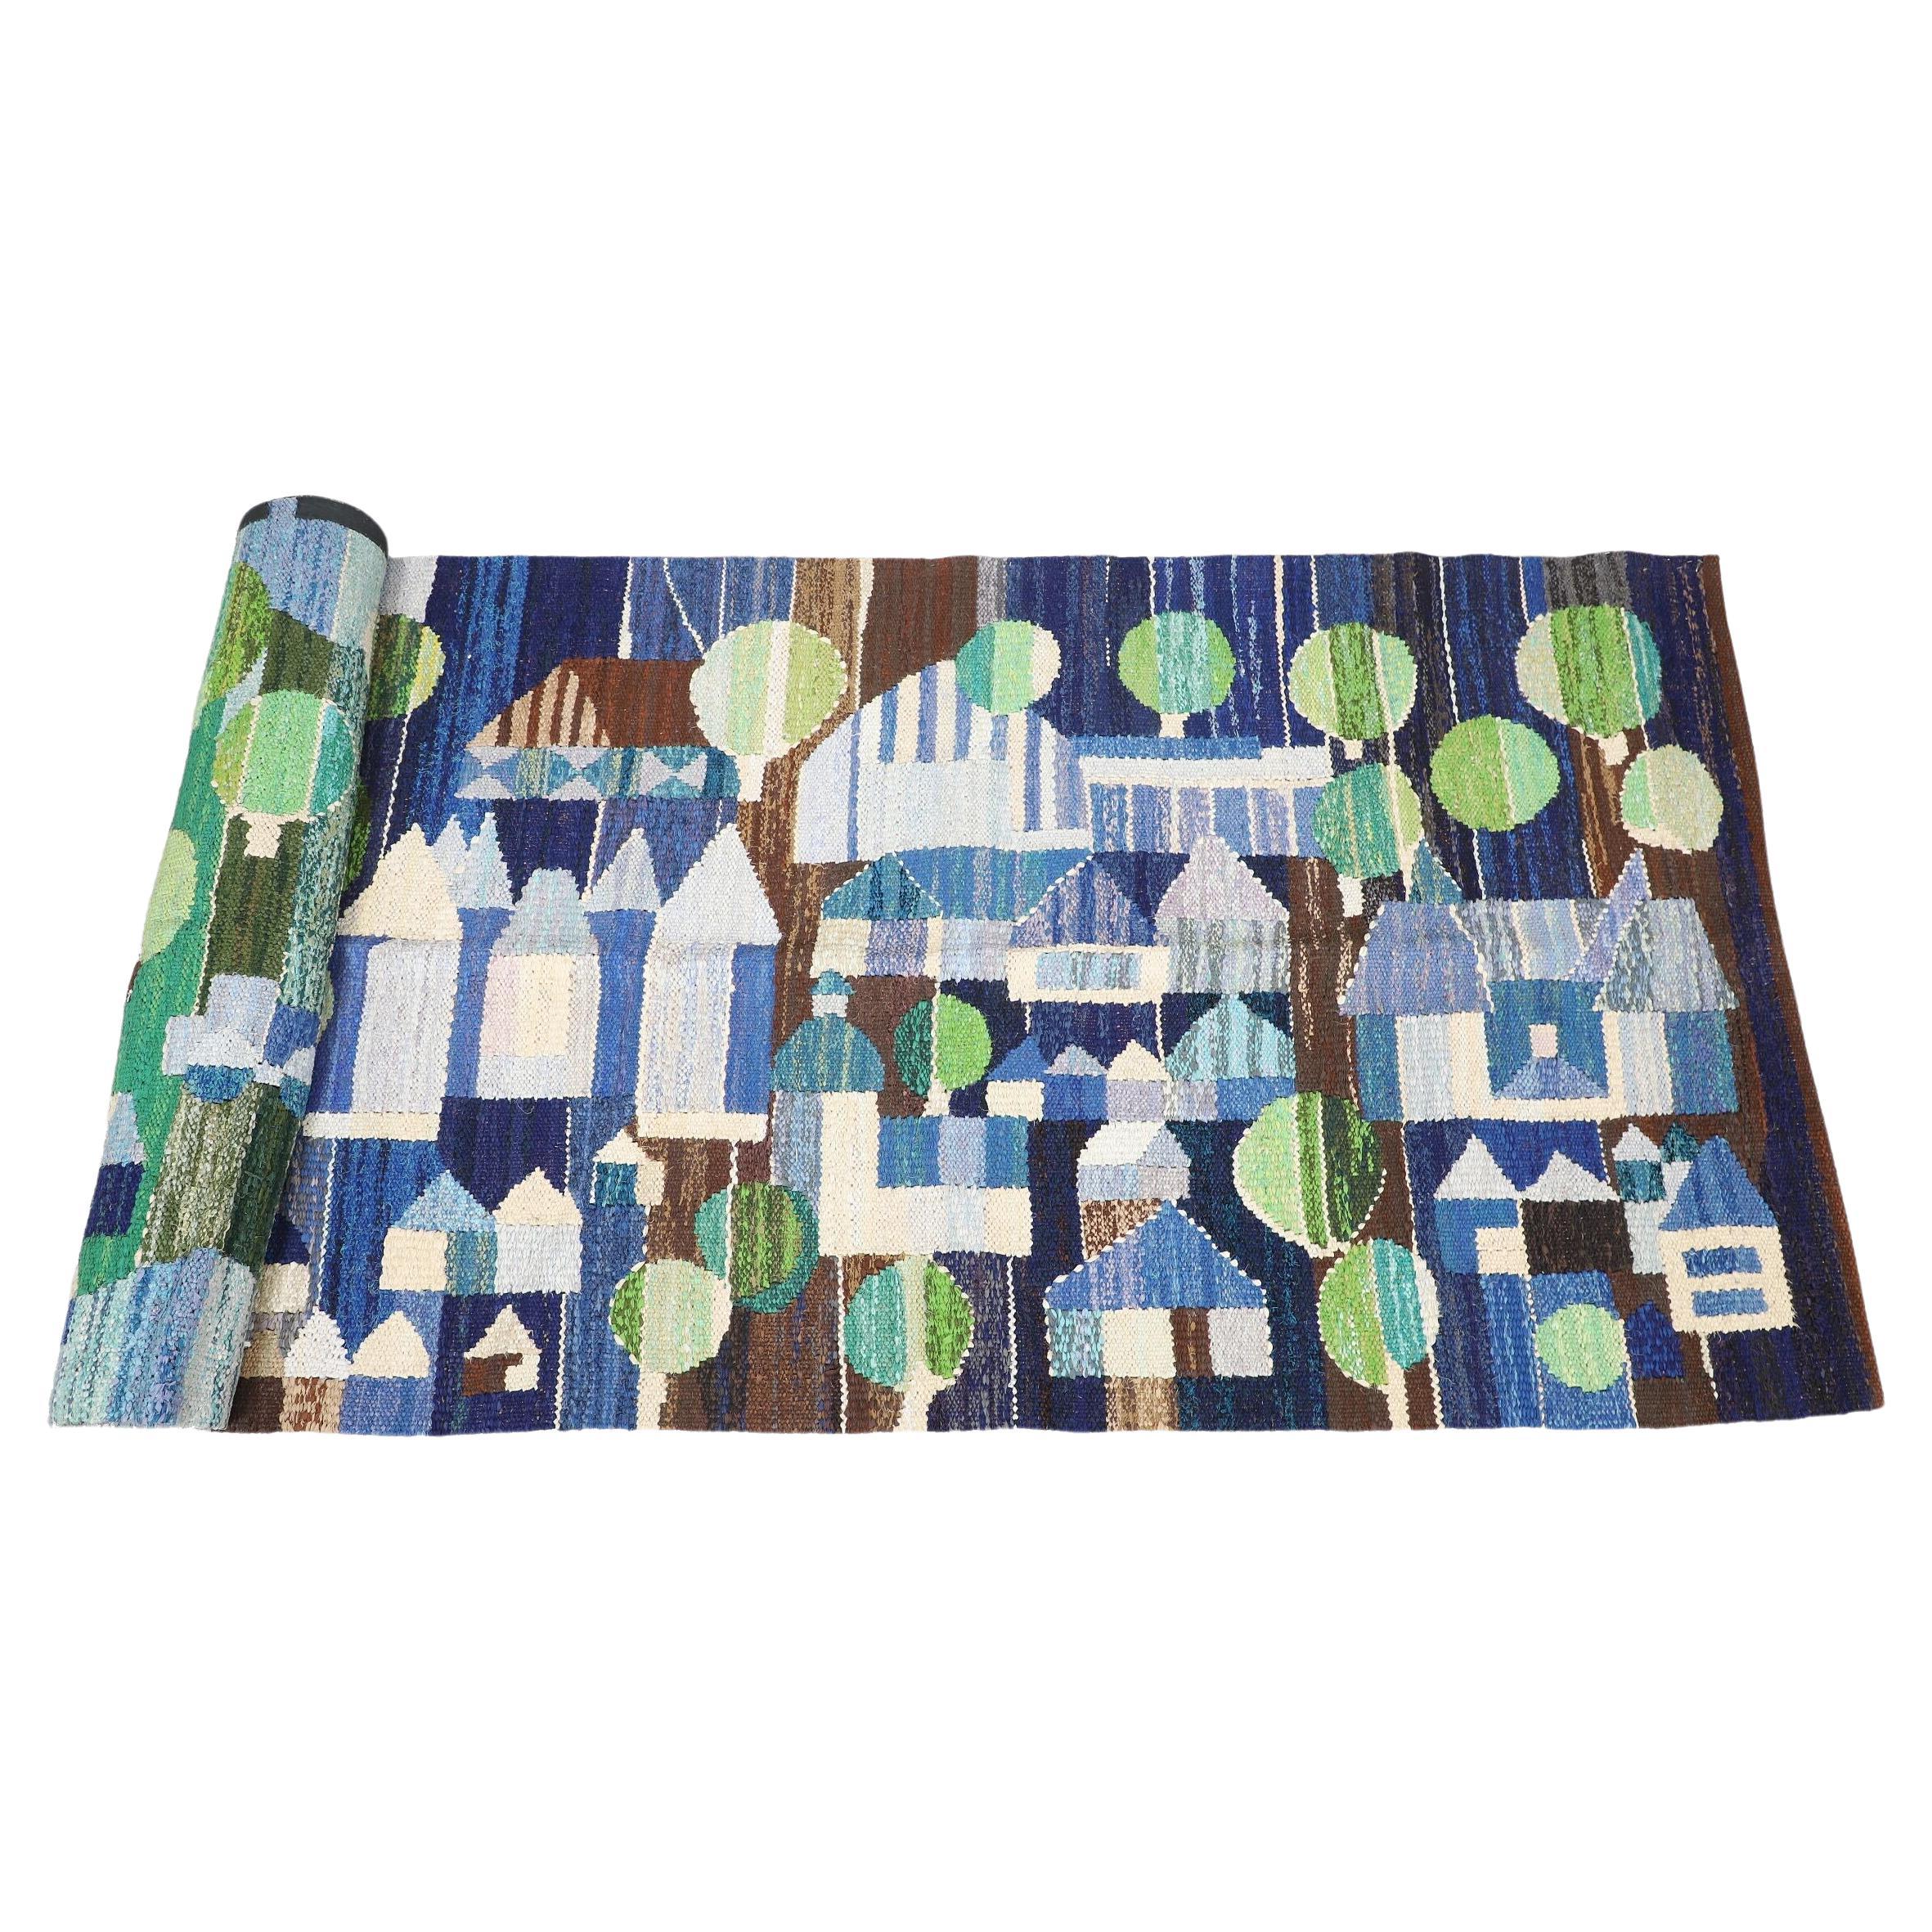 Very Long Swedish Rug Depicting a Village in Shades of Blue, Green, and Brown For Sale